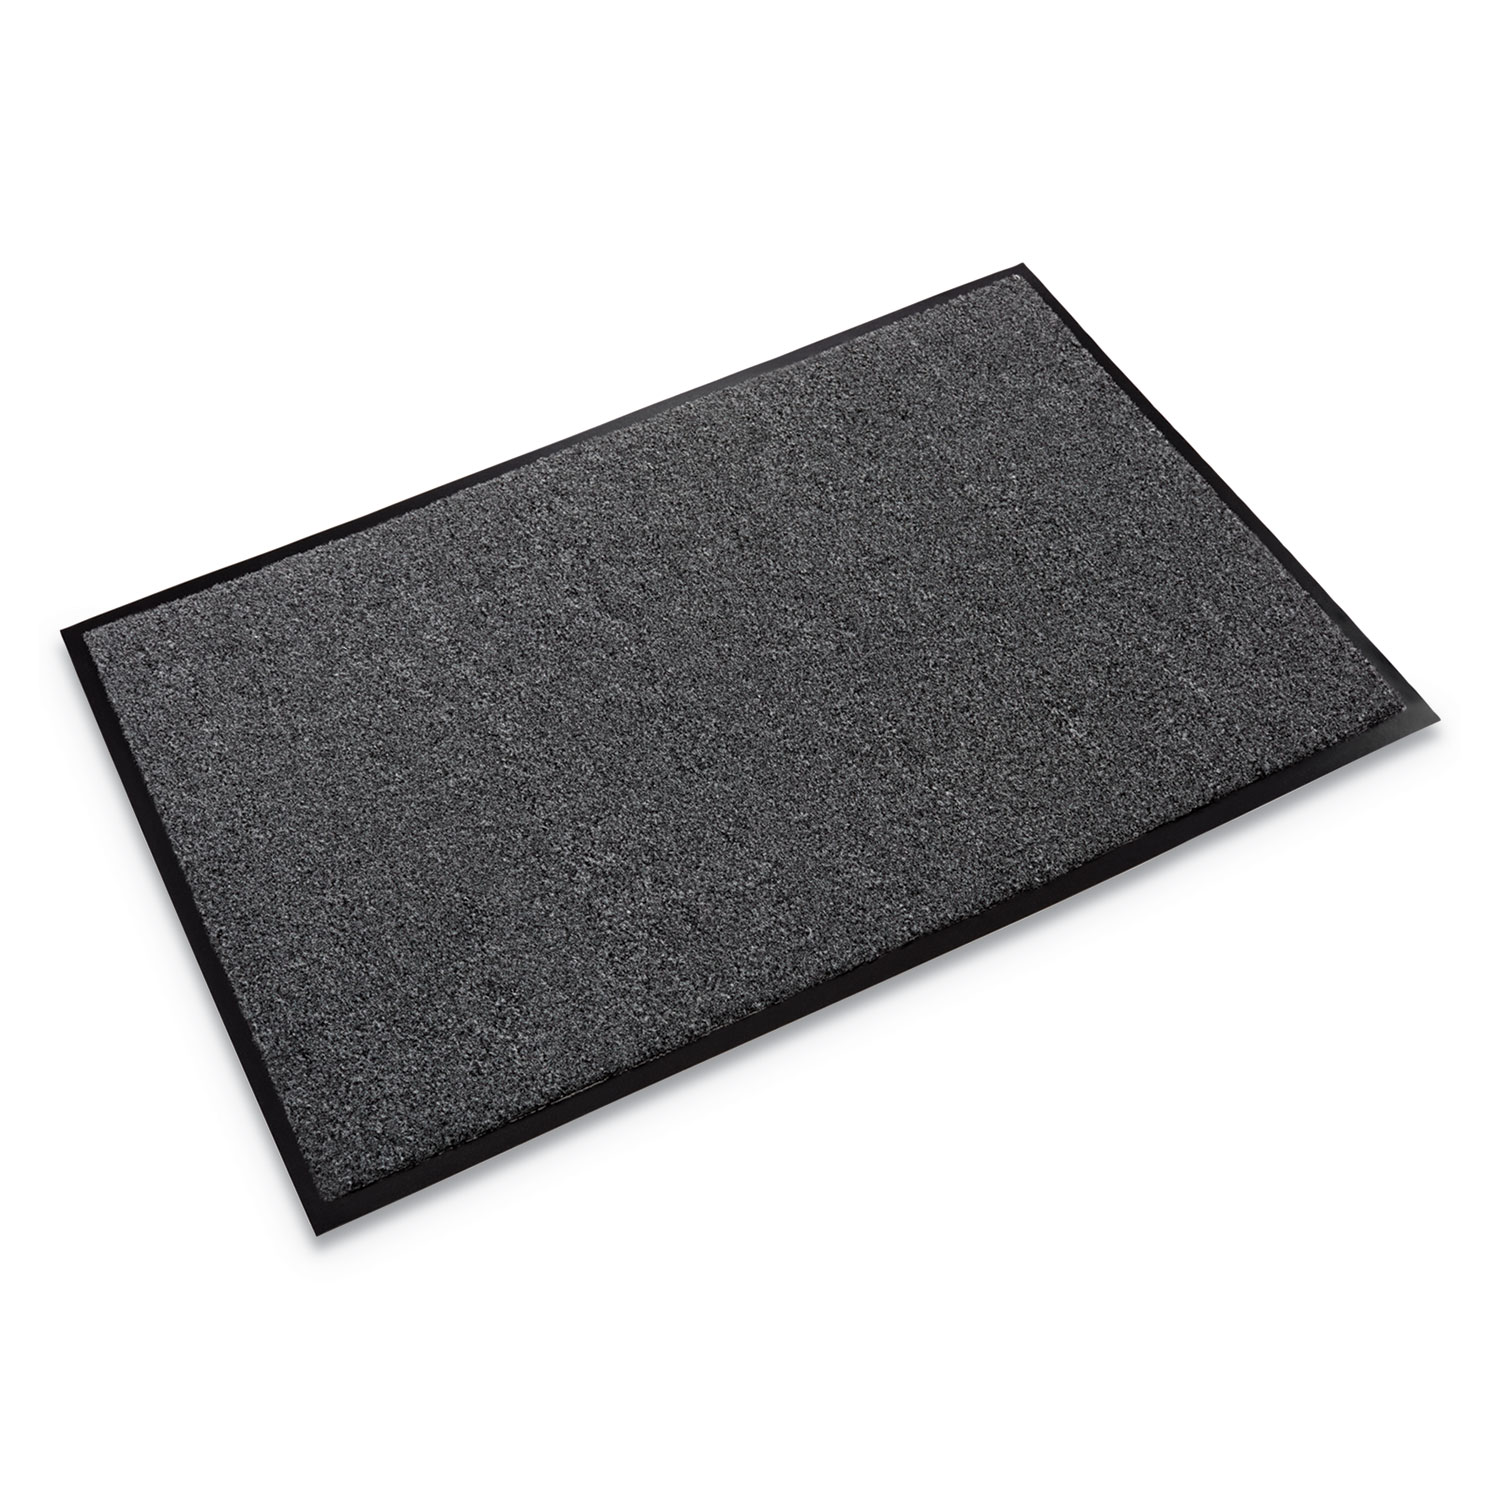  Crown GS 0023CH Rely-On Olefin Indoor Wiper Mat, 24 x 36, Charcoal (CWNGS0023CH) 